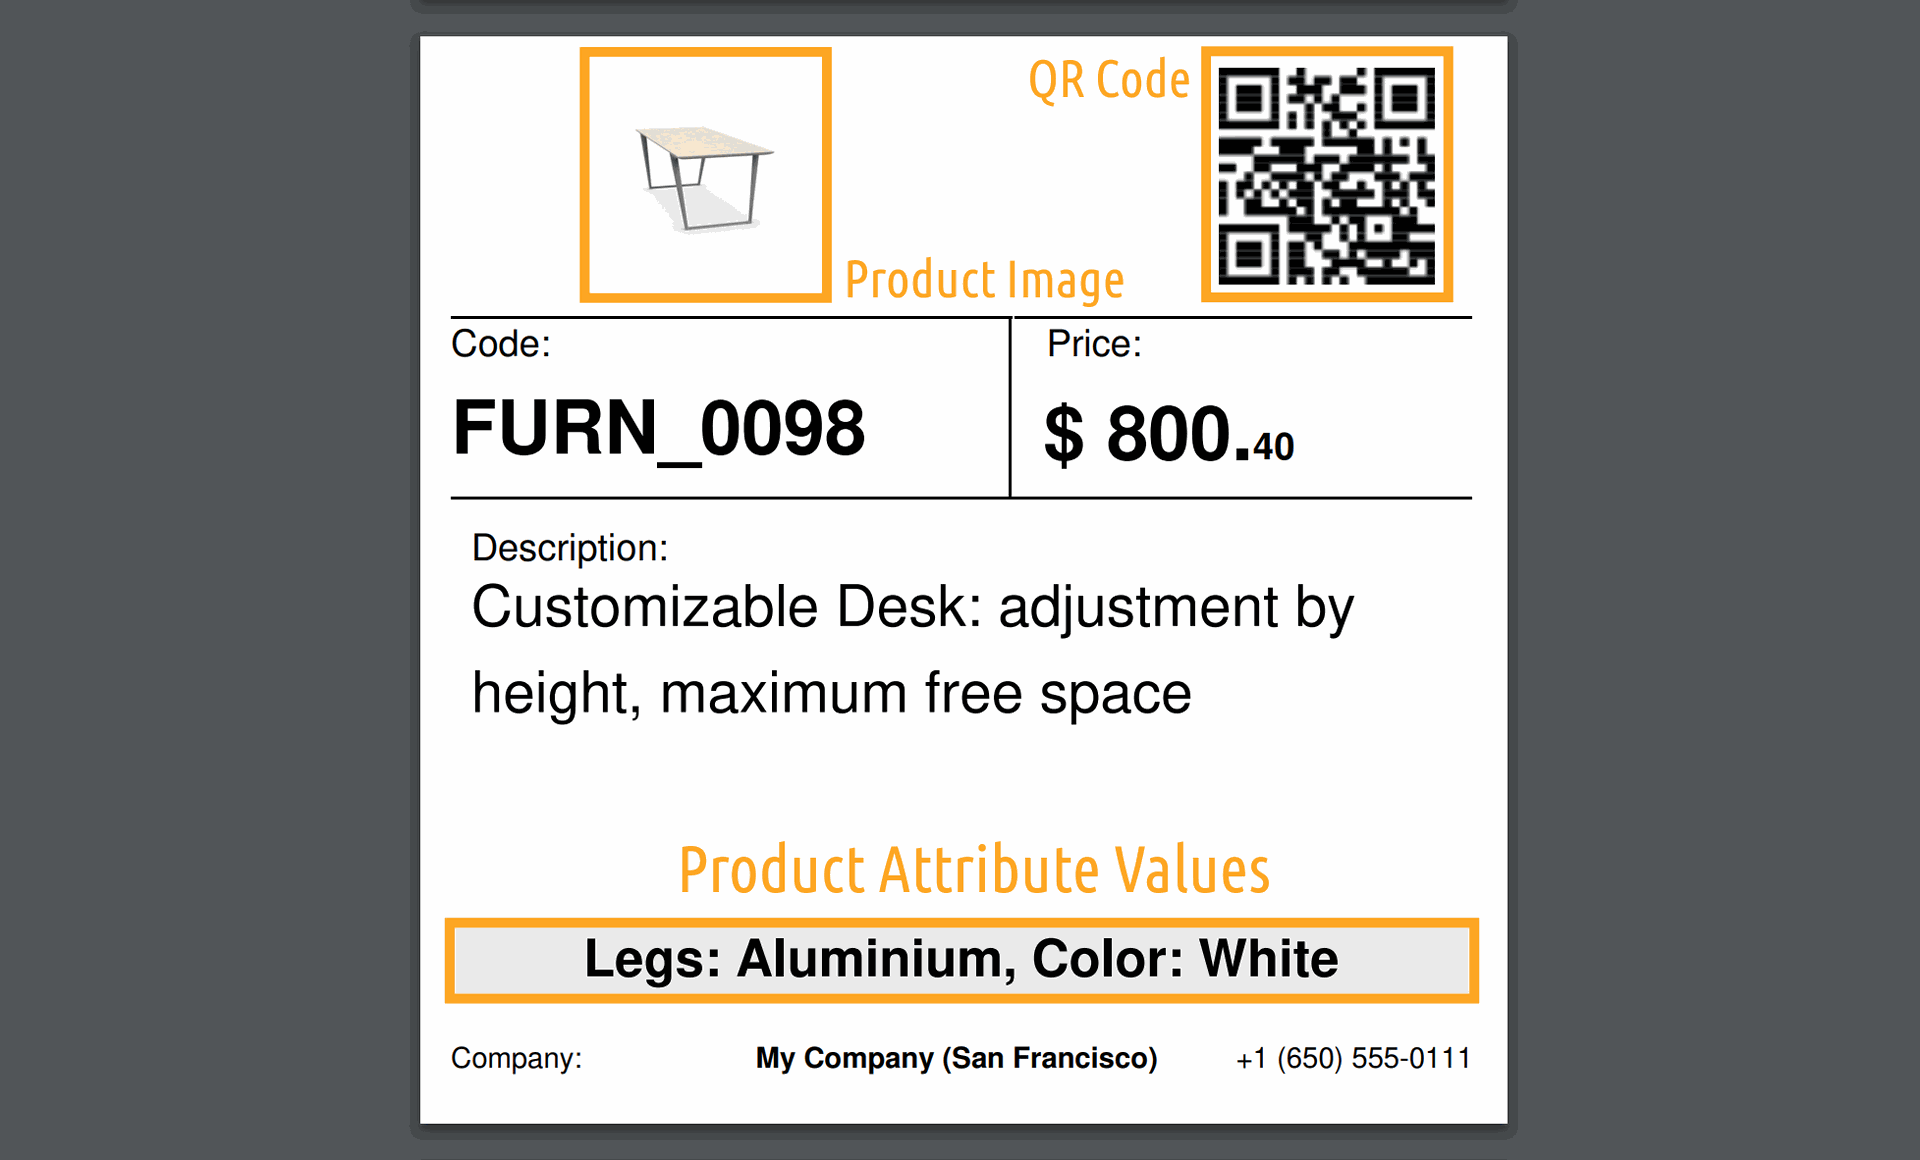 odoo product label 100x100 with qrcode image and attributes